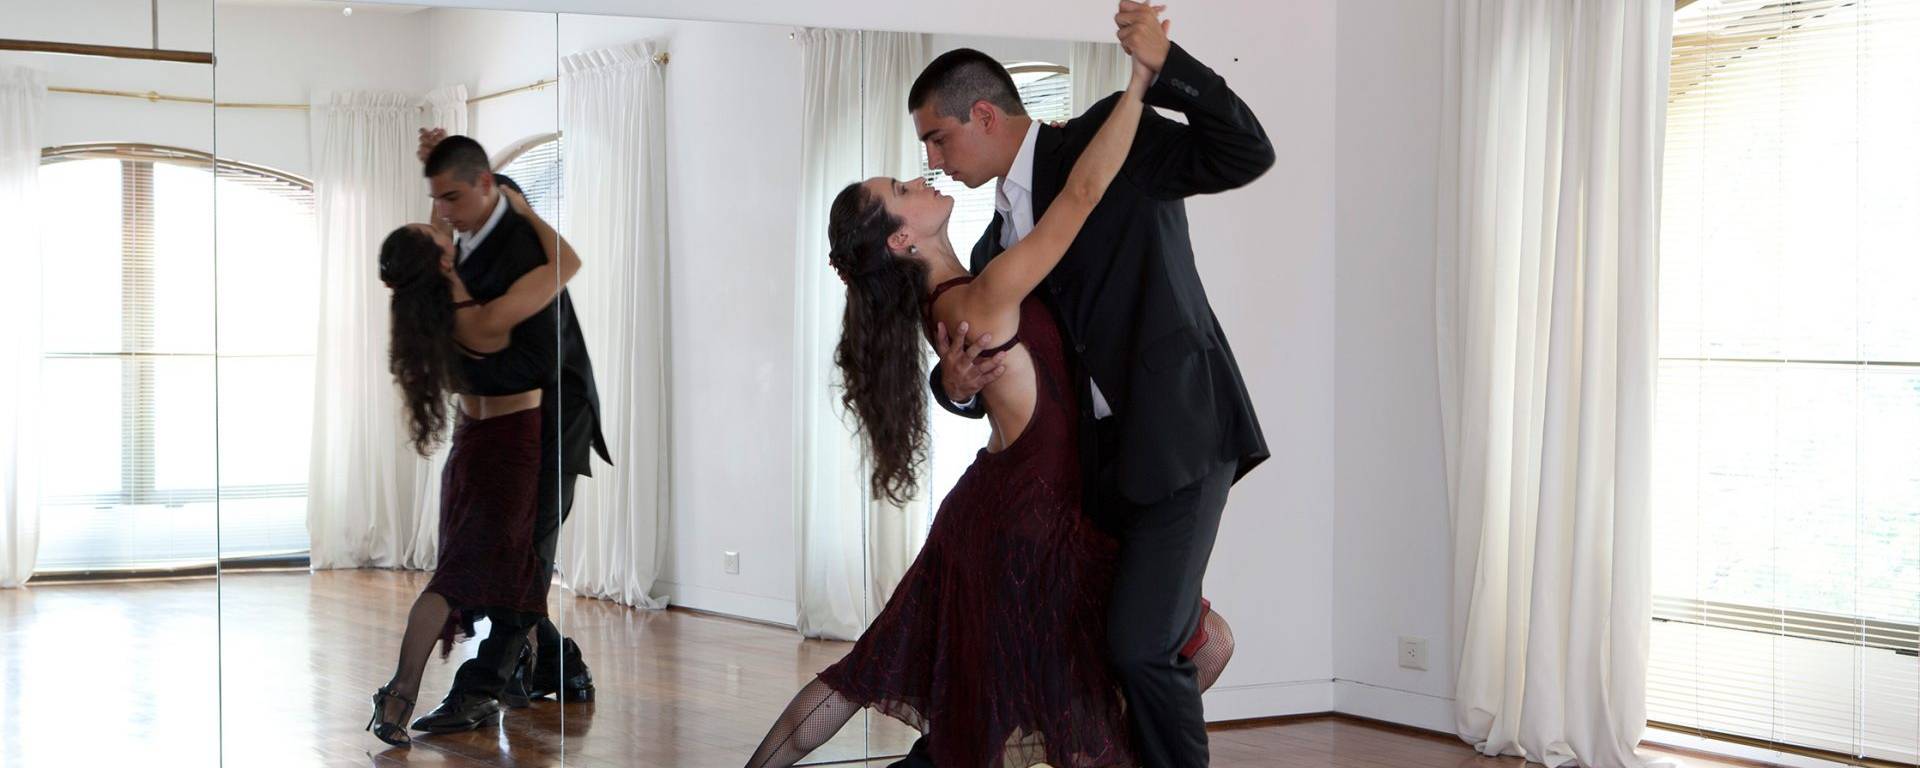 two couples dance the tango